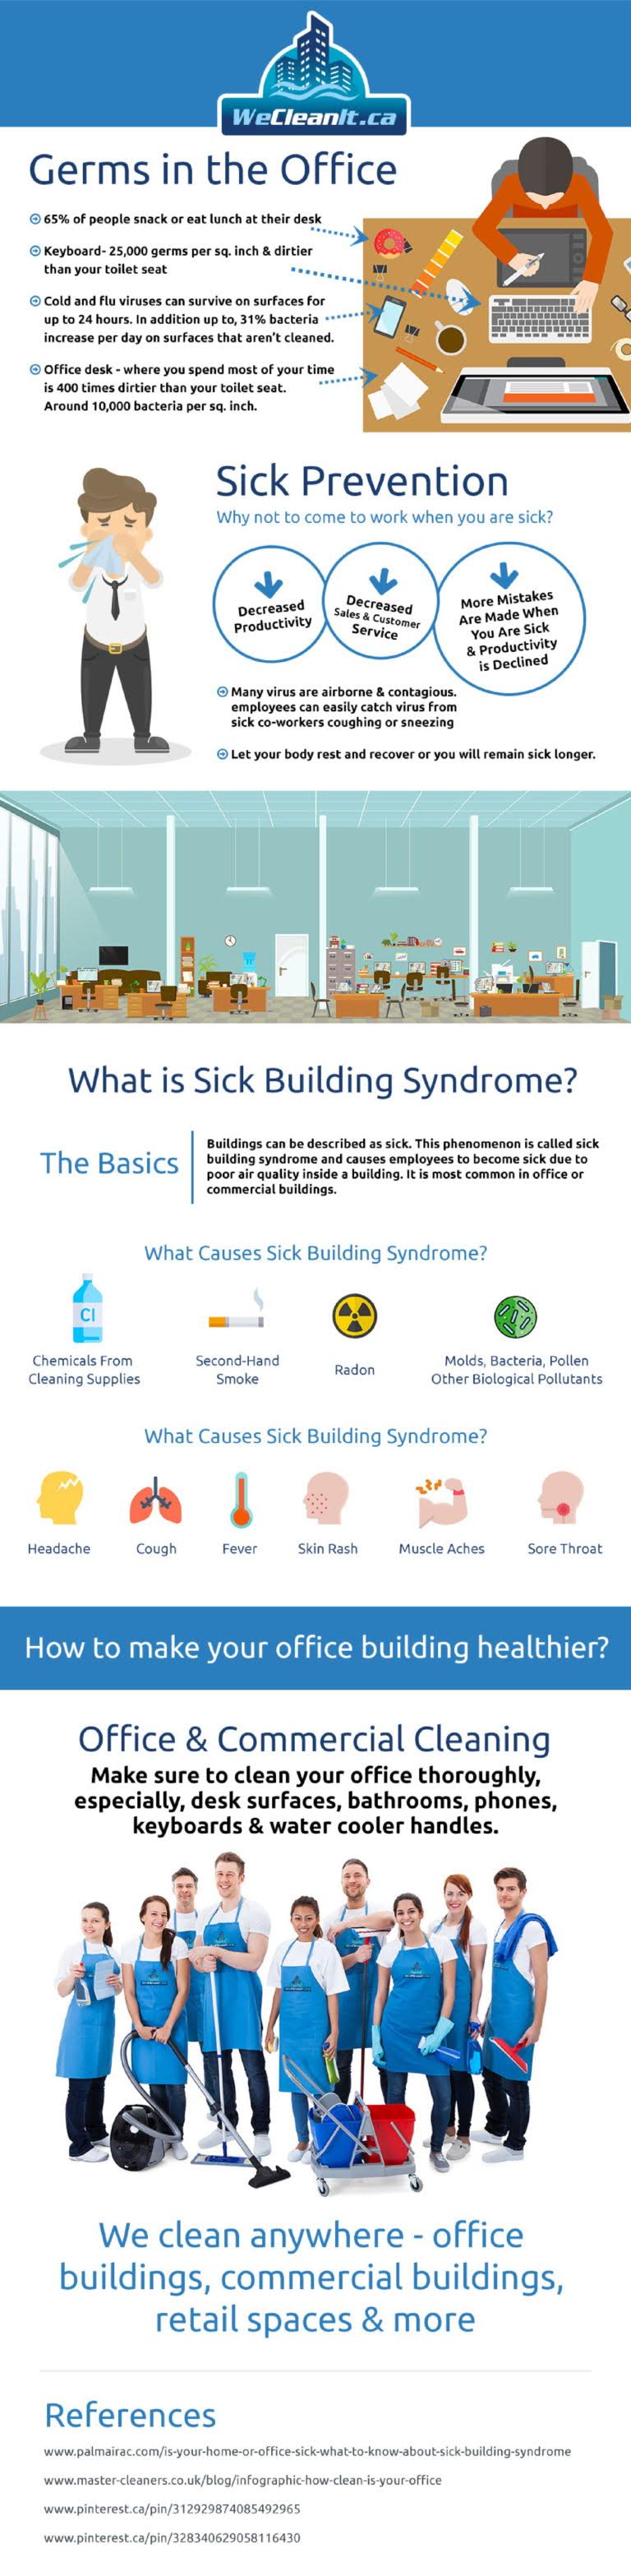 Less Employee Sick Days With Office Cleaning #infographic